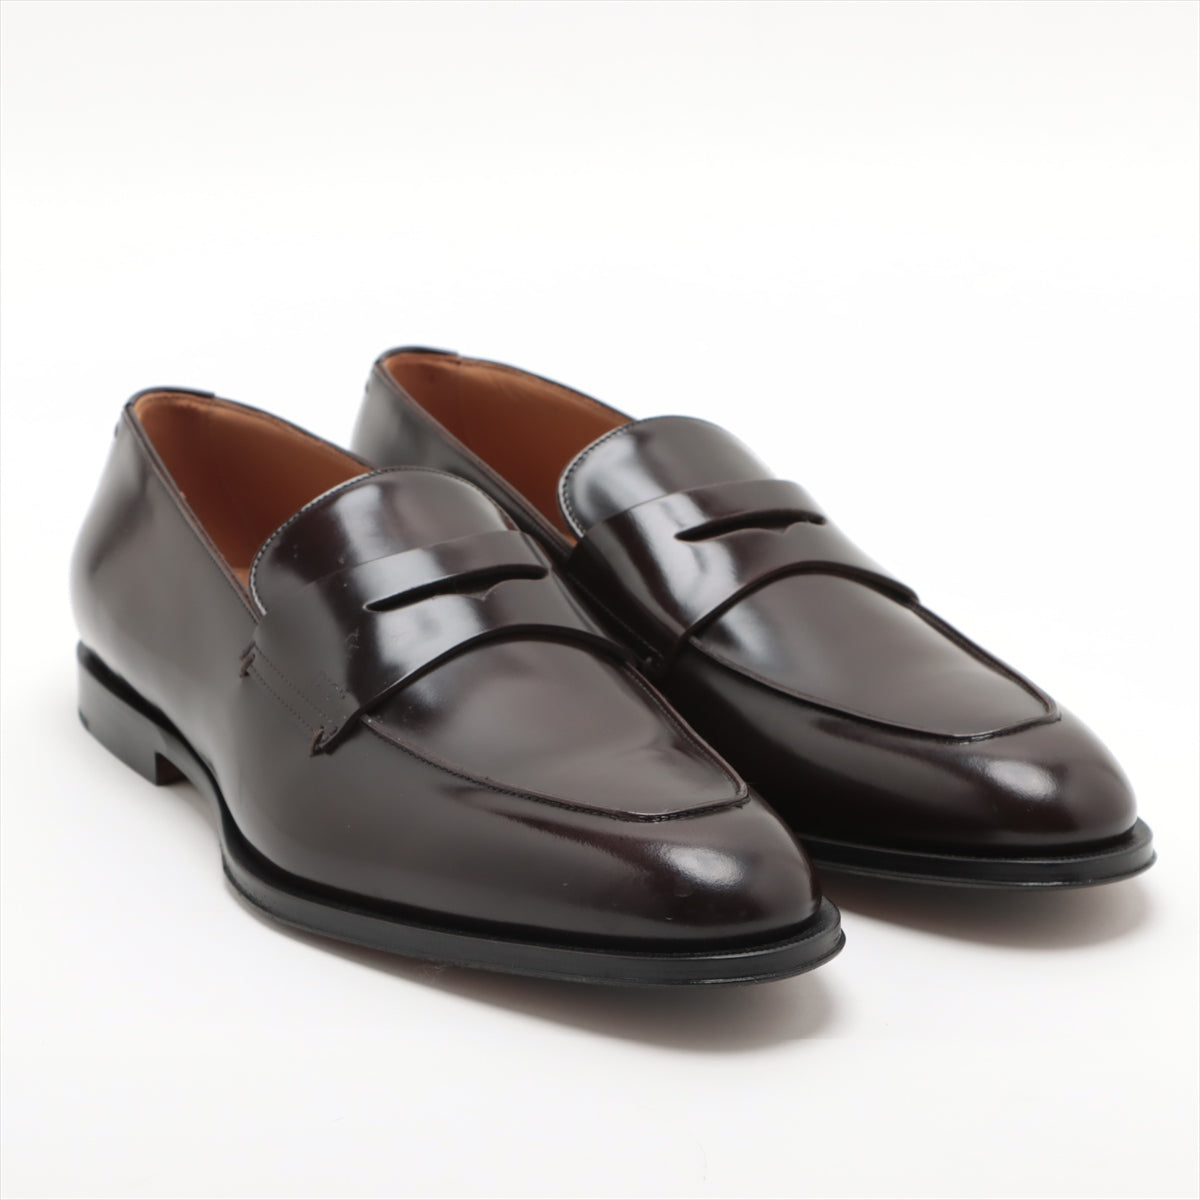 DIOR Leather Loafer 43 Men's Brown ME0322 box There is a bag